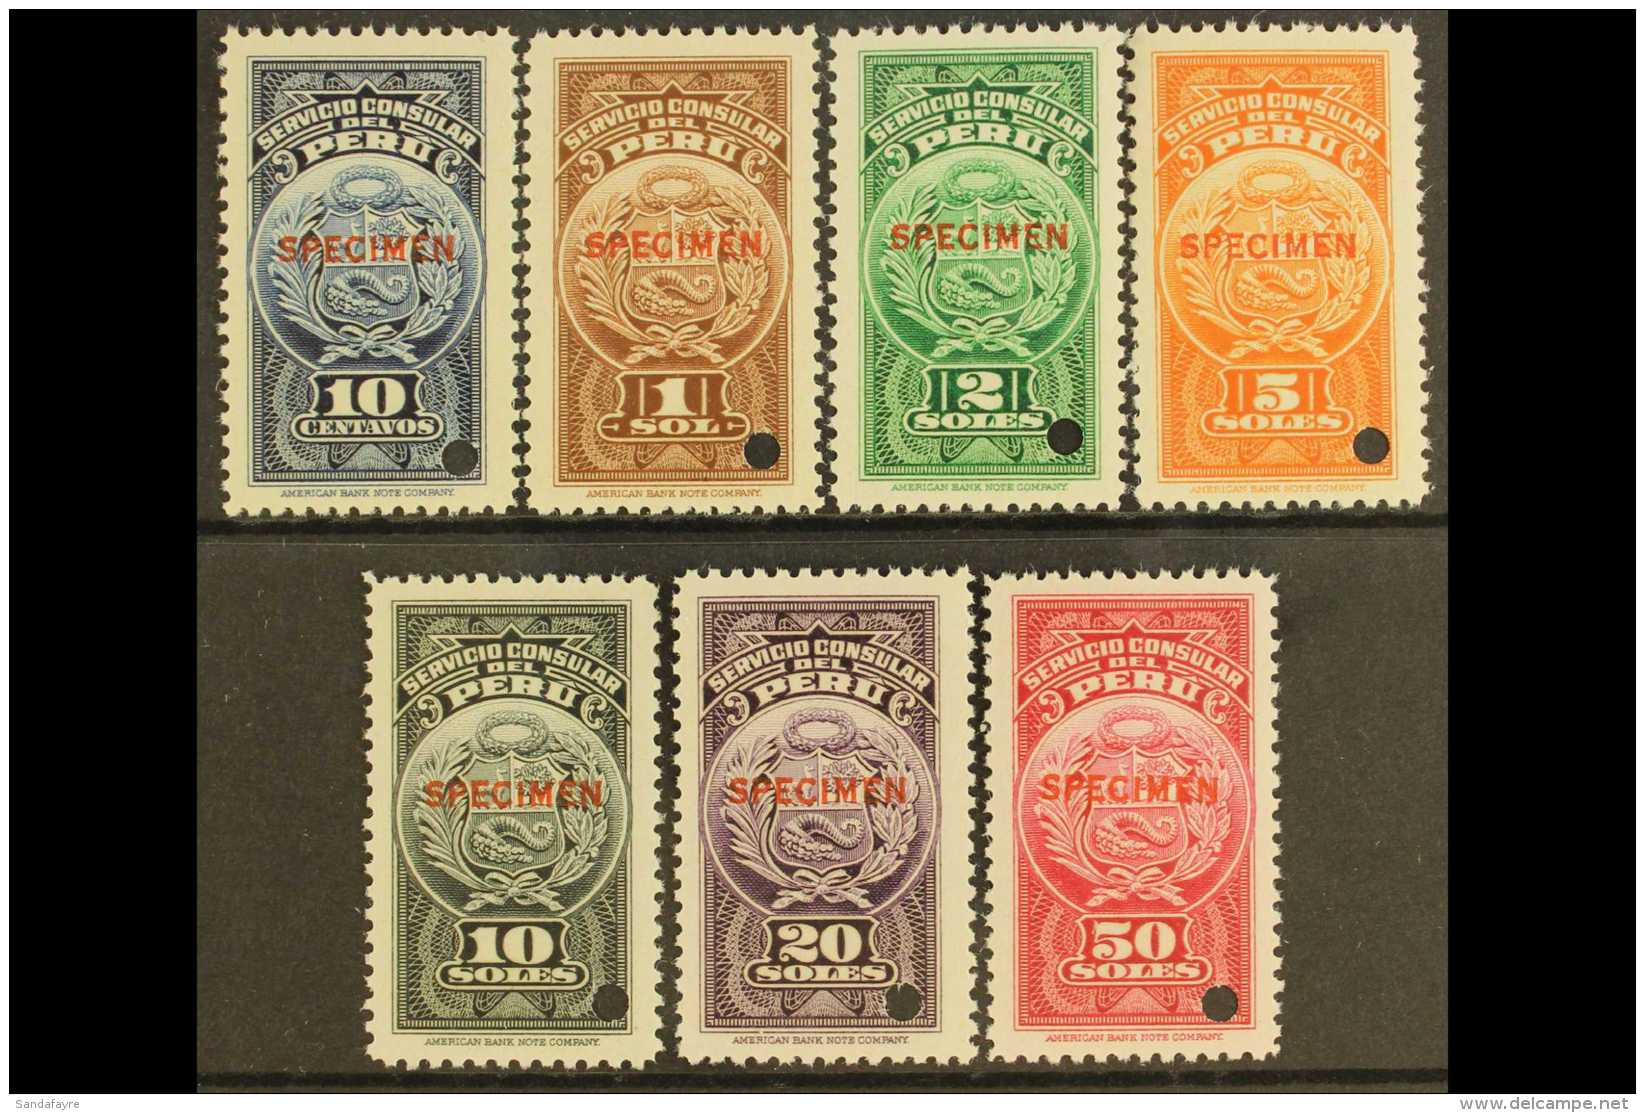 CONSULAR REVENUES 1938 Complete Set With "SPECIMEN" Overprints, Very Fine Never Hinged Mint, With Small Security... - Peru